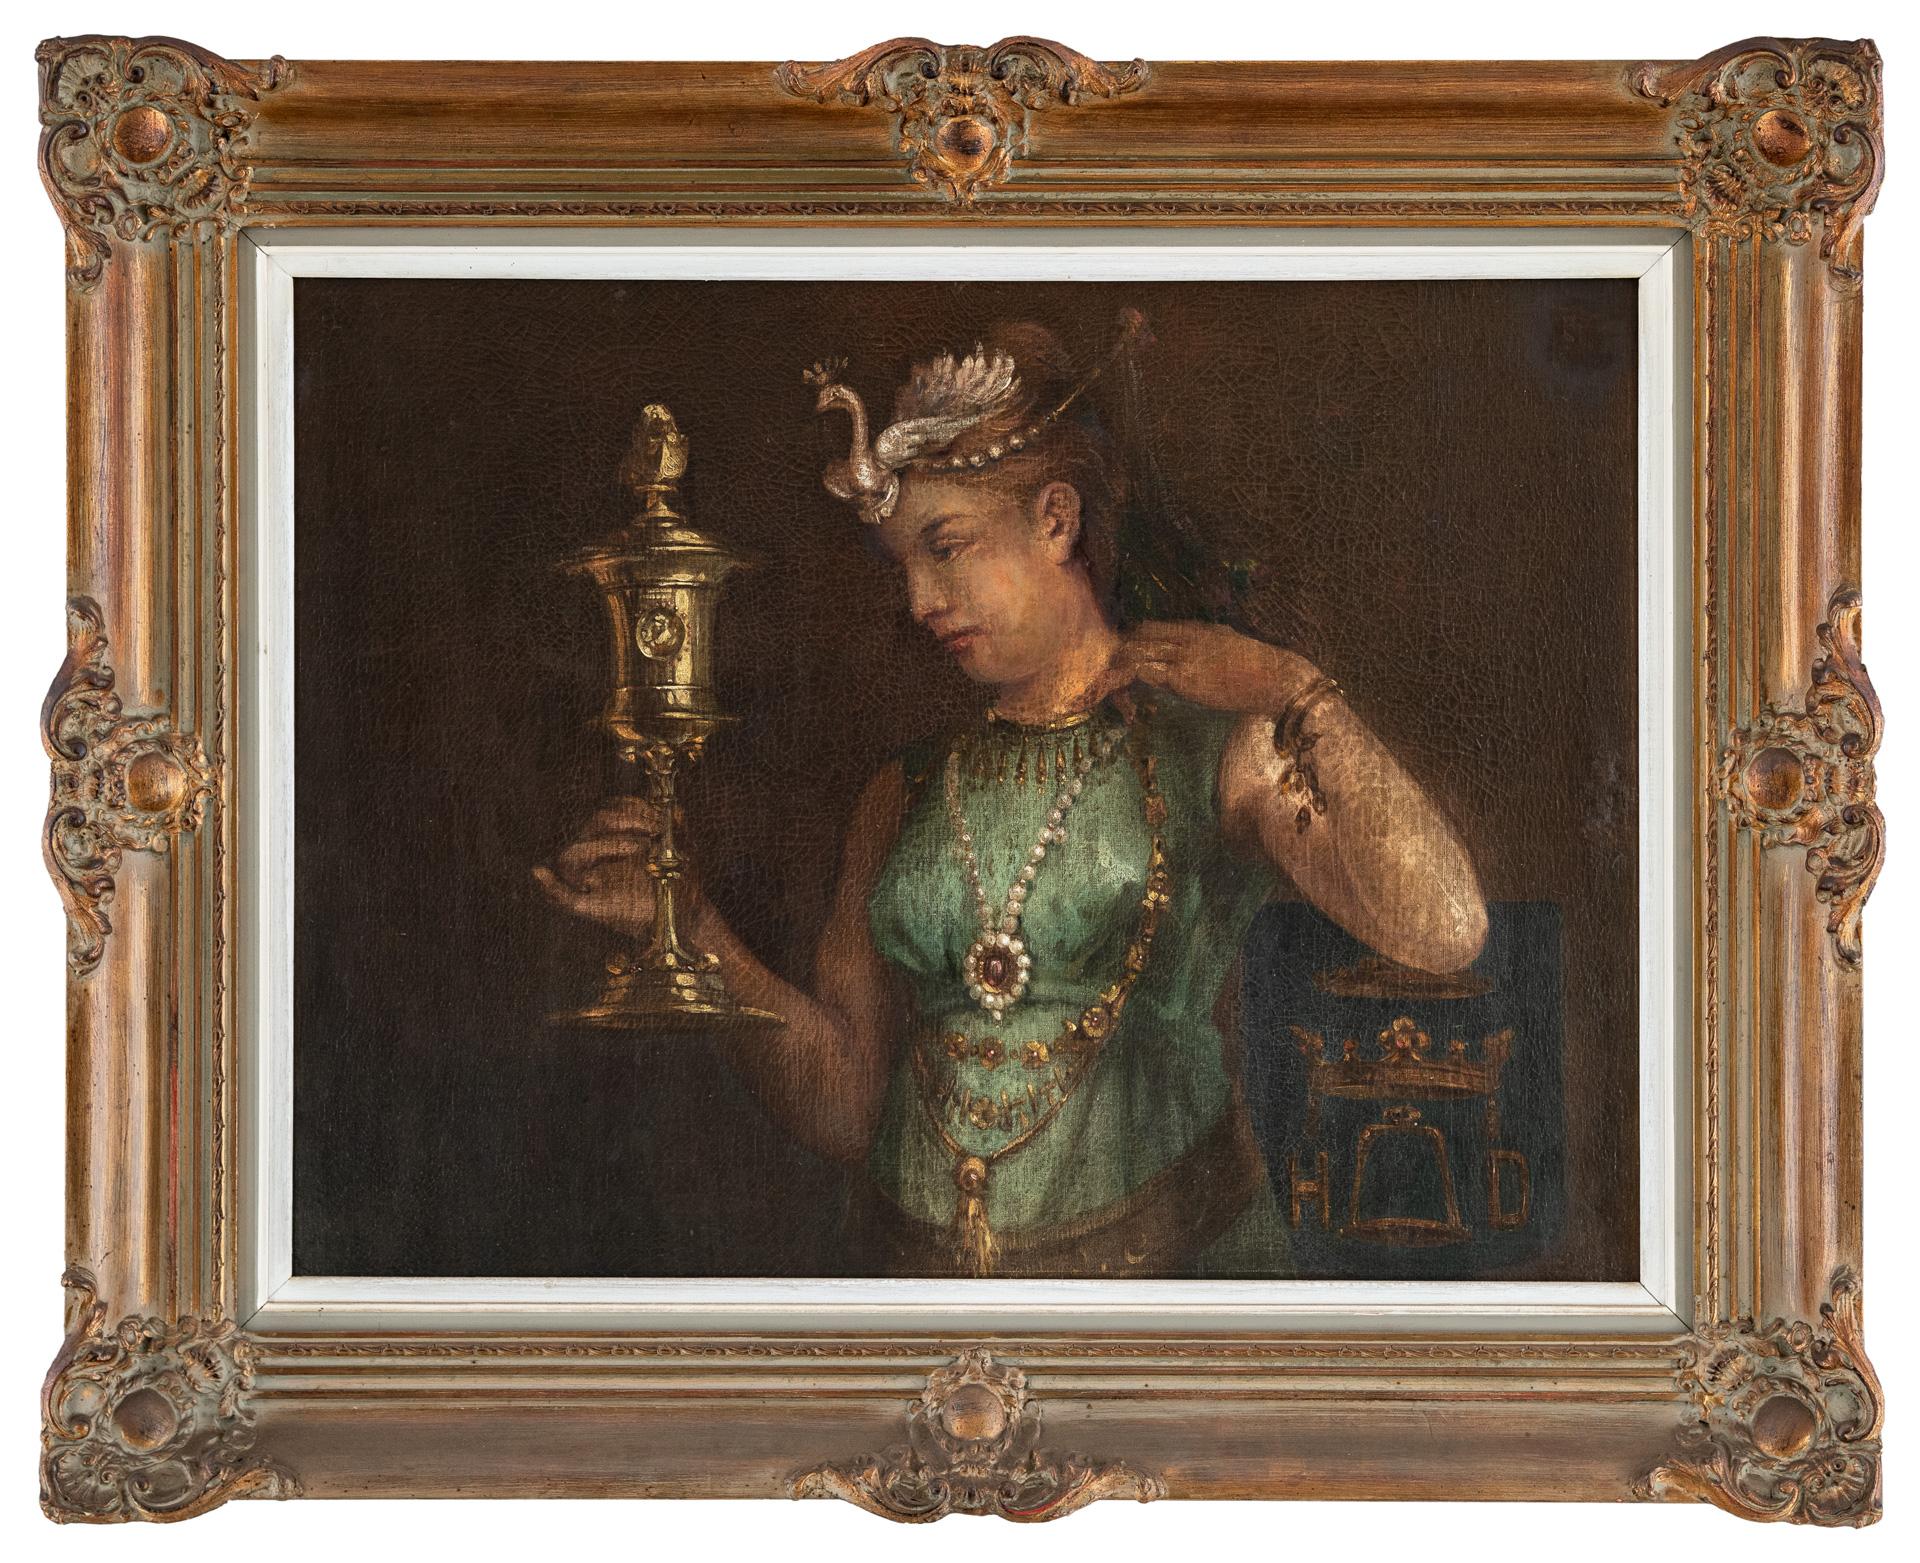 Late 18th century European figure painting - Holy Grail - Oil on canvas Italy